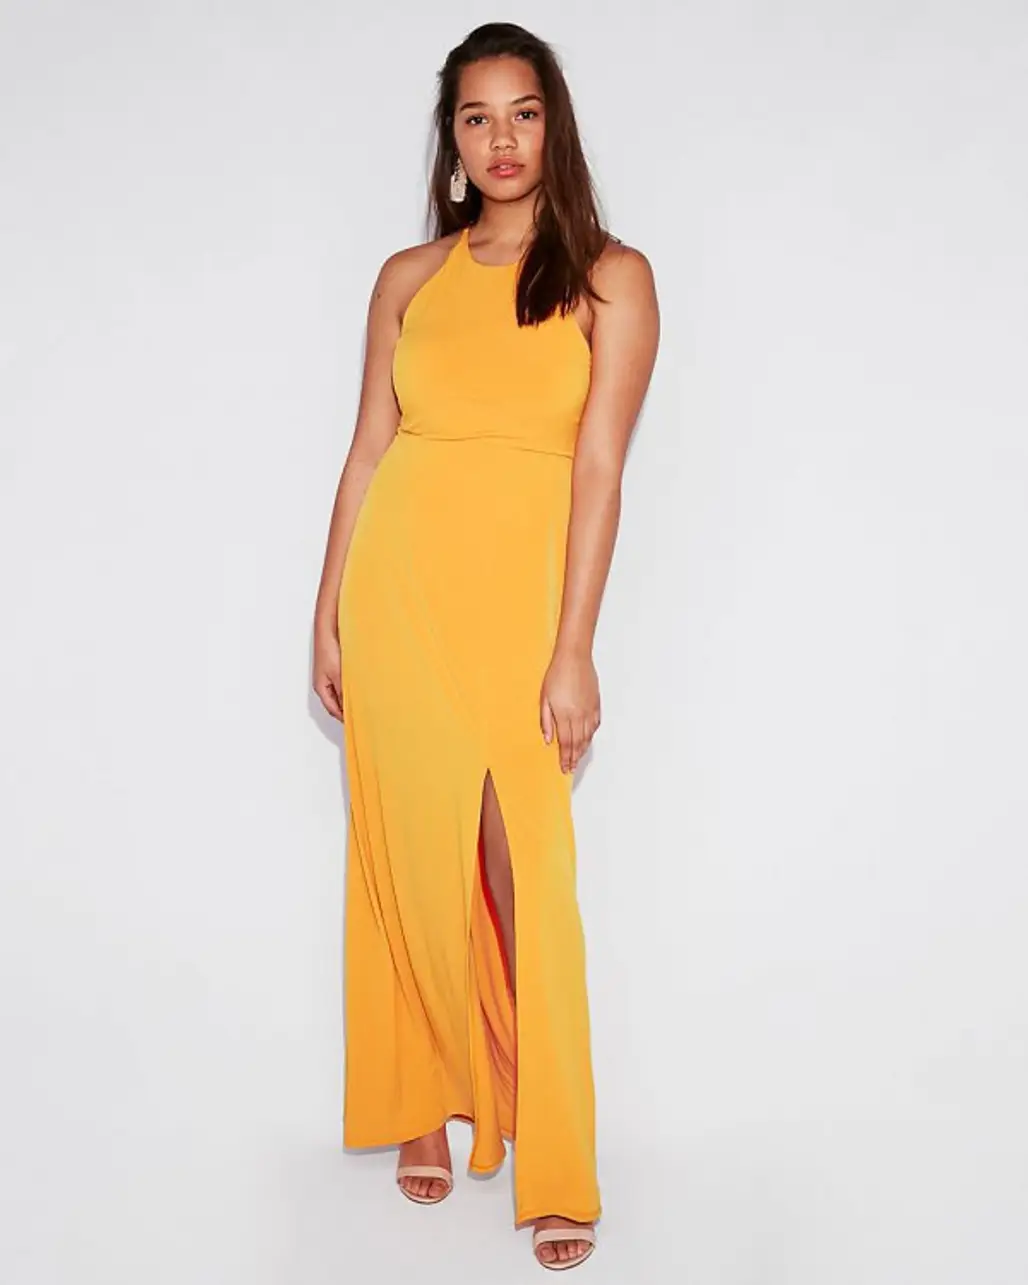 Cute Maxi Dresses for Summer You Need ...